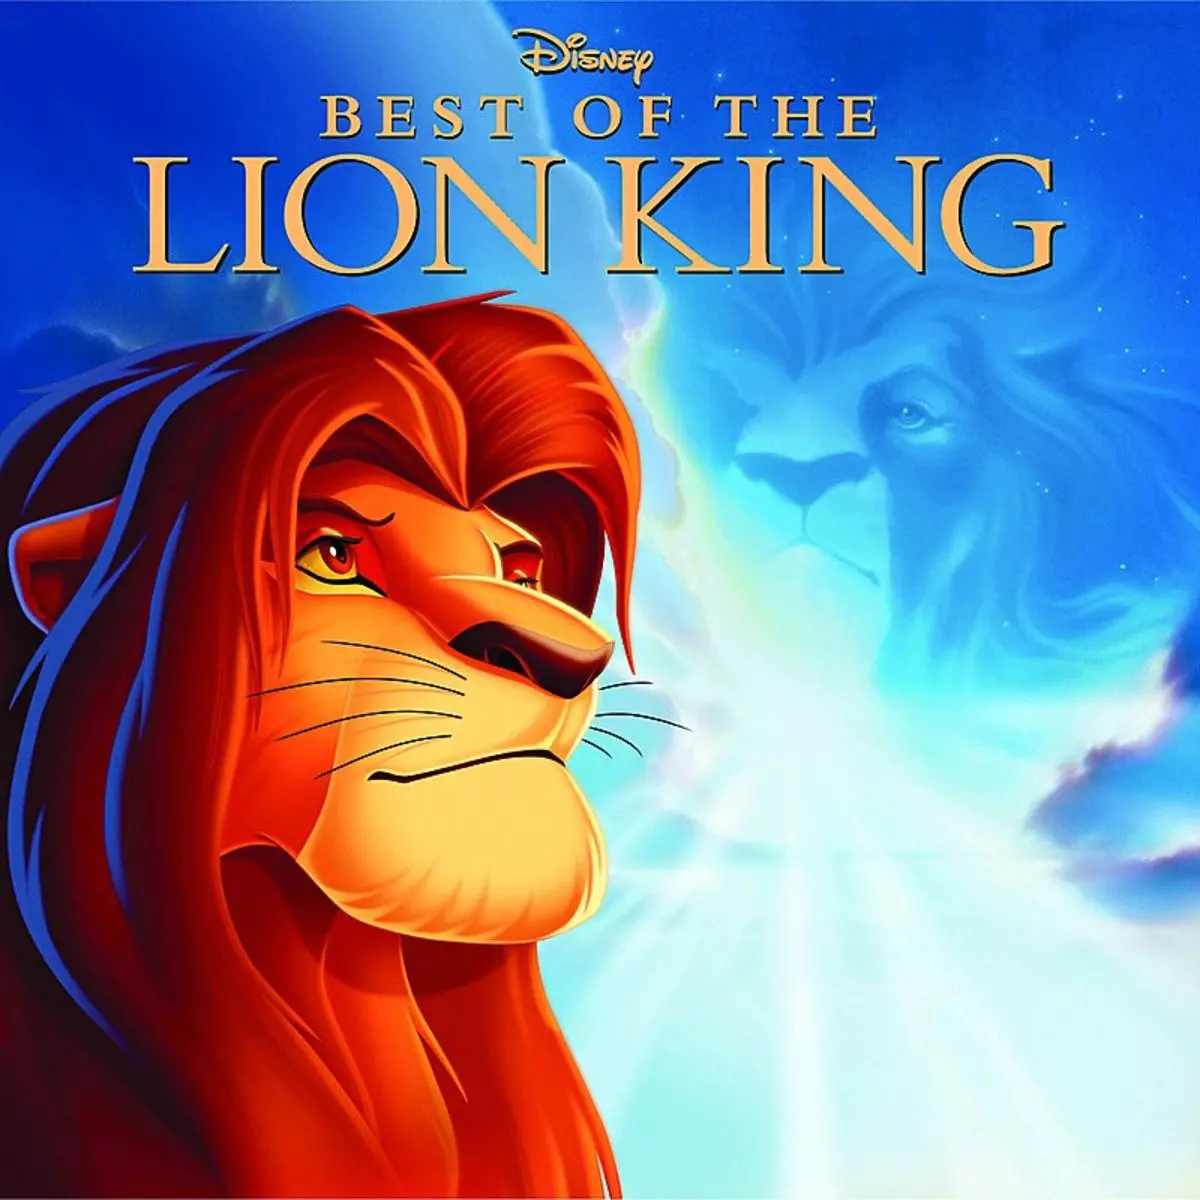 I Just Can T Wait To Be King Lyrics In English Best Of The Lion King I Just Can T Wait To Be King Song Lyrics In English Free Online On Gaana Com